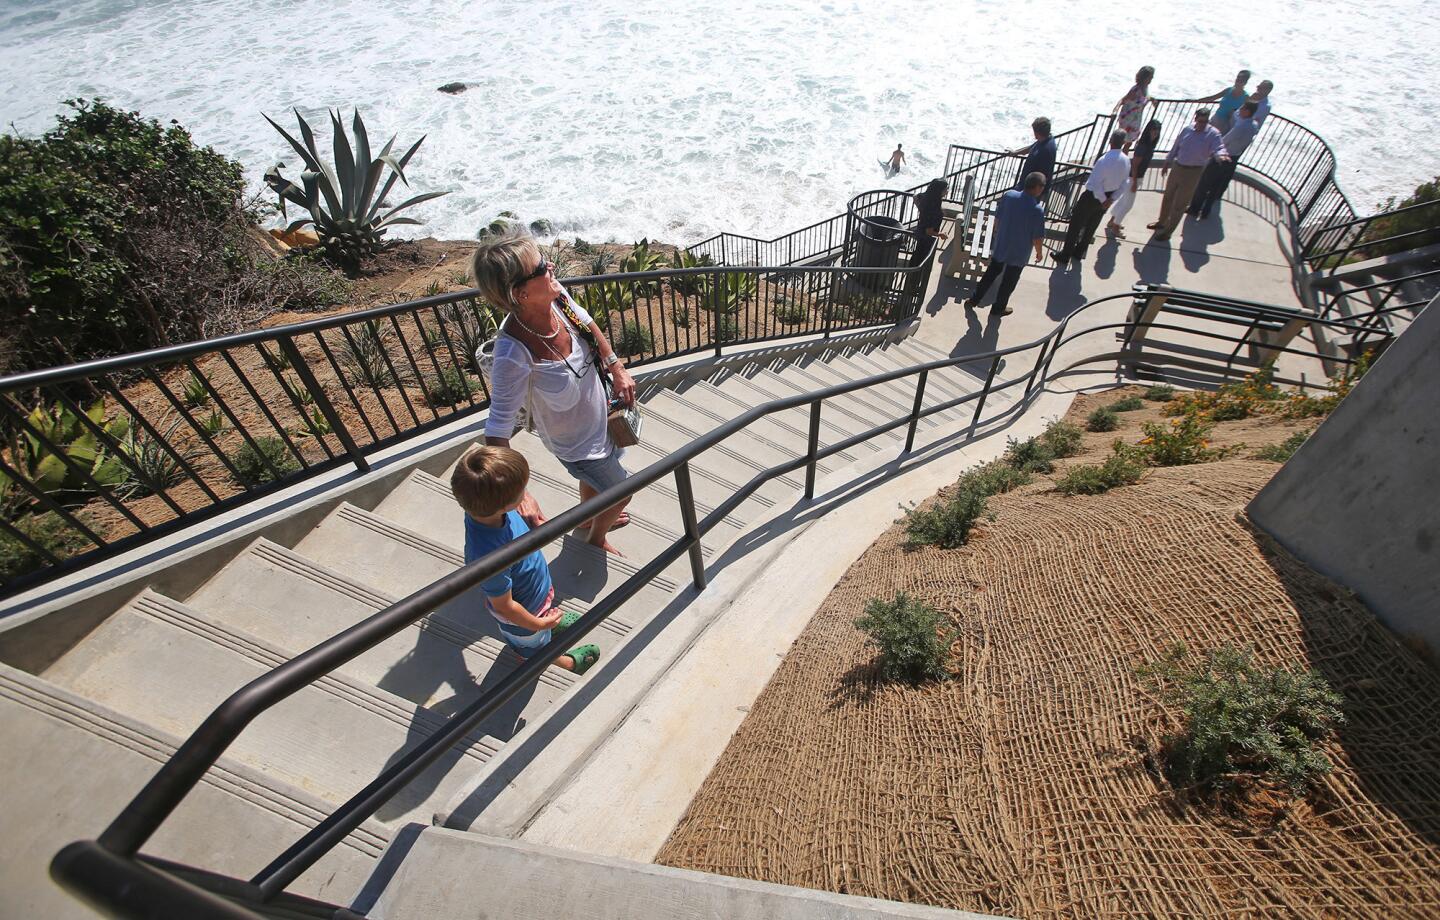 Jan Shoemaker makes her way down the stairs after an unveiling ceremony for the Agate Street Beach access improvement project Tuesday in Laguna Beach. The renovation includes new viewpoints and wider stairs.